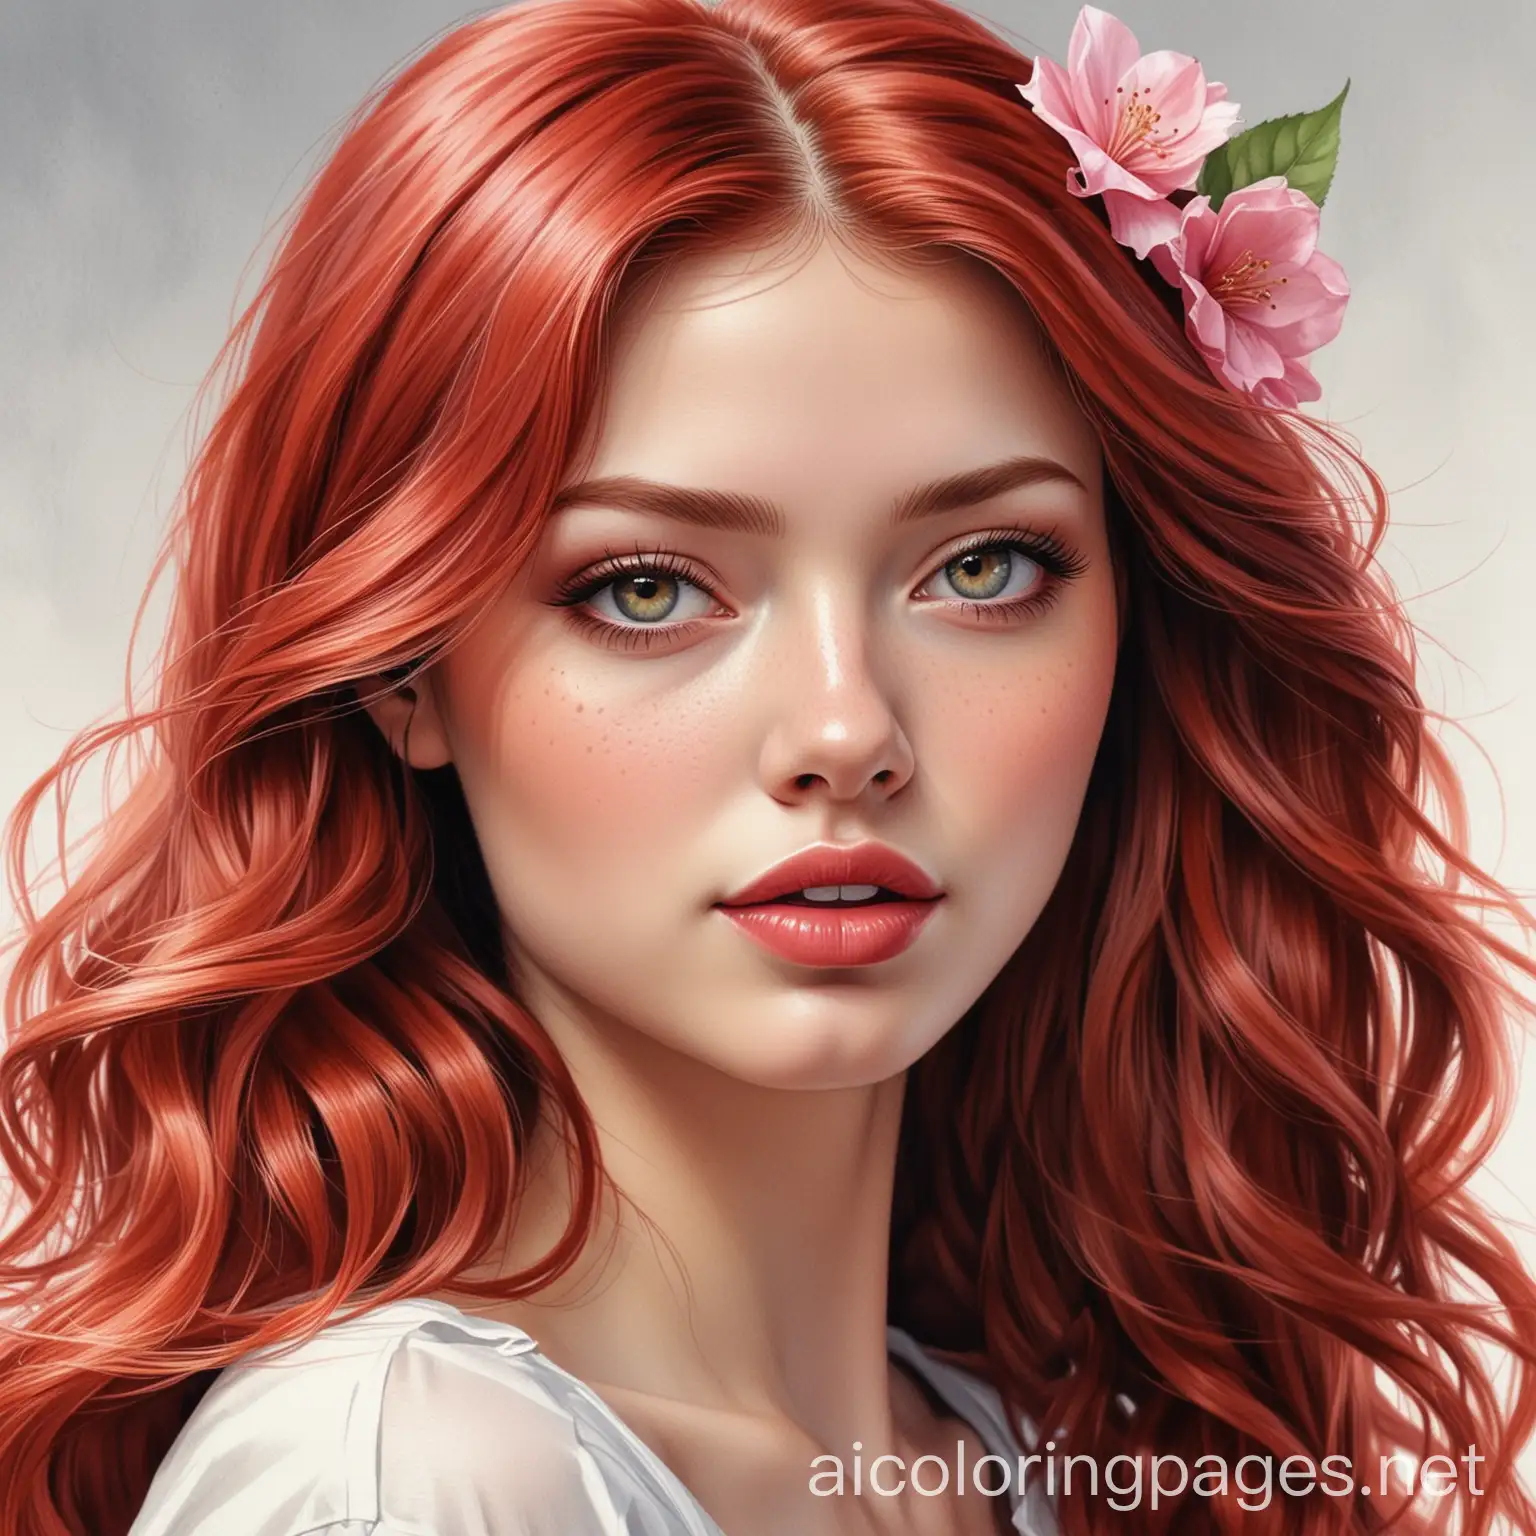 a pretty girl with a unique face she is the fairy of love. She has long cherry red hair along with soft waves, her skin tone is a olive DARK and she’s wearing red lipstick while her eyes are a deep but soft warm dark brown. She is wearing pink and red themed clothing., Hyperrealism, High quality, Highly detailed, Ultra detailed, Details, Sharp focus, Watercolor, Illustration, Retro Style, Poster, 8K, Coloring Page, black and white, line art, white background, Simplicity, Ample White Space. The background of the coloring page is plain white to make it easy for young children to color within the lines. The outlines of all the subjects are easy to distinguish, making it simple for kids to color without too much difficulty